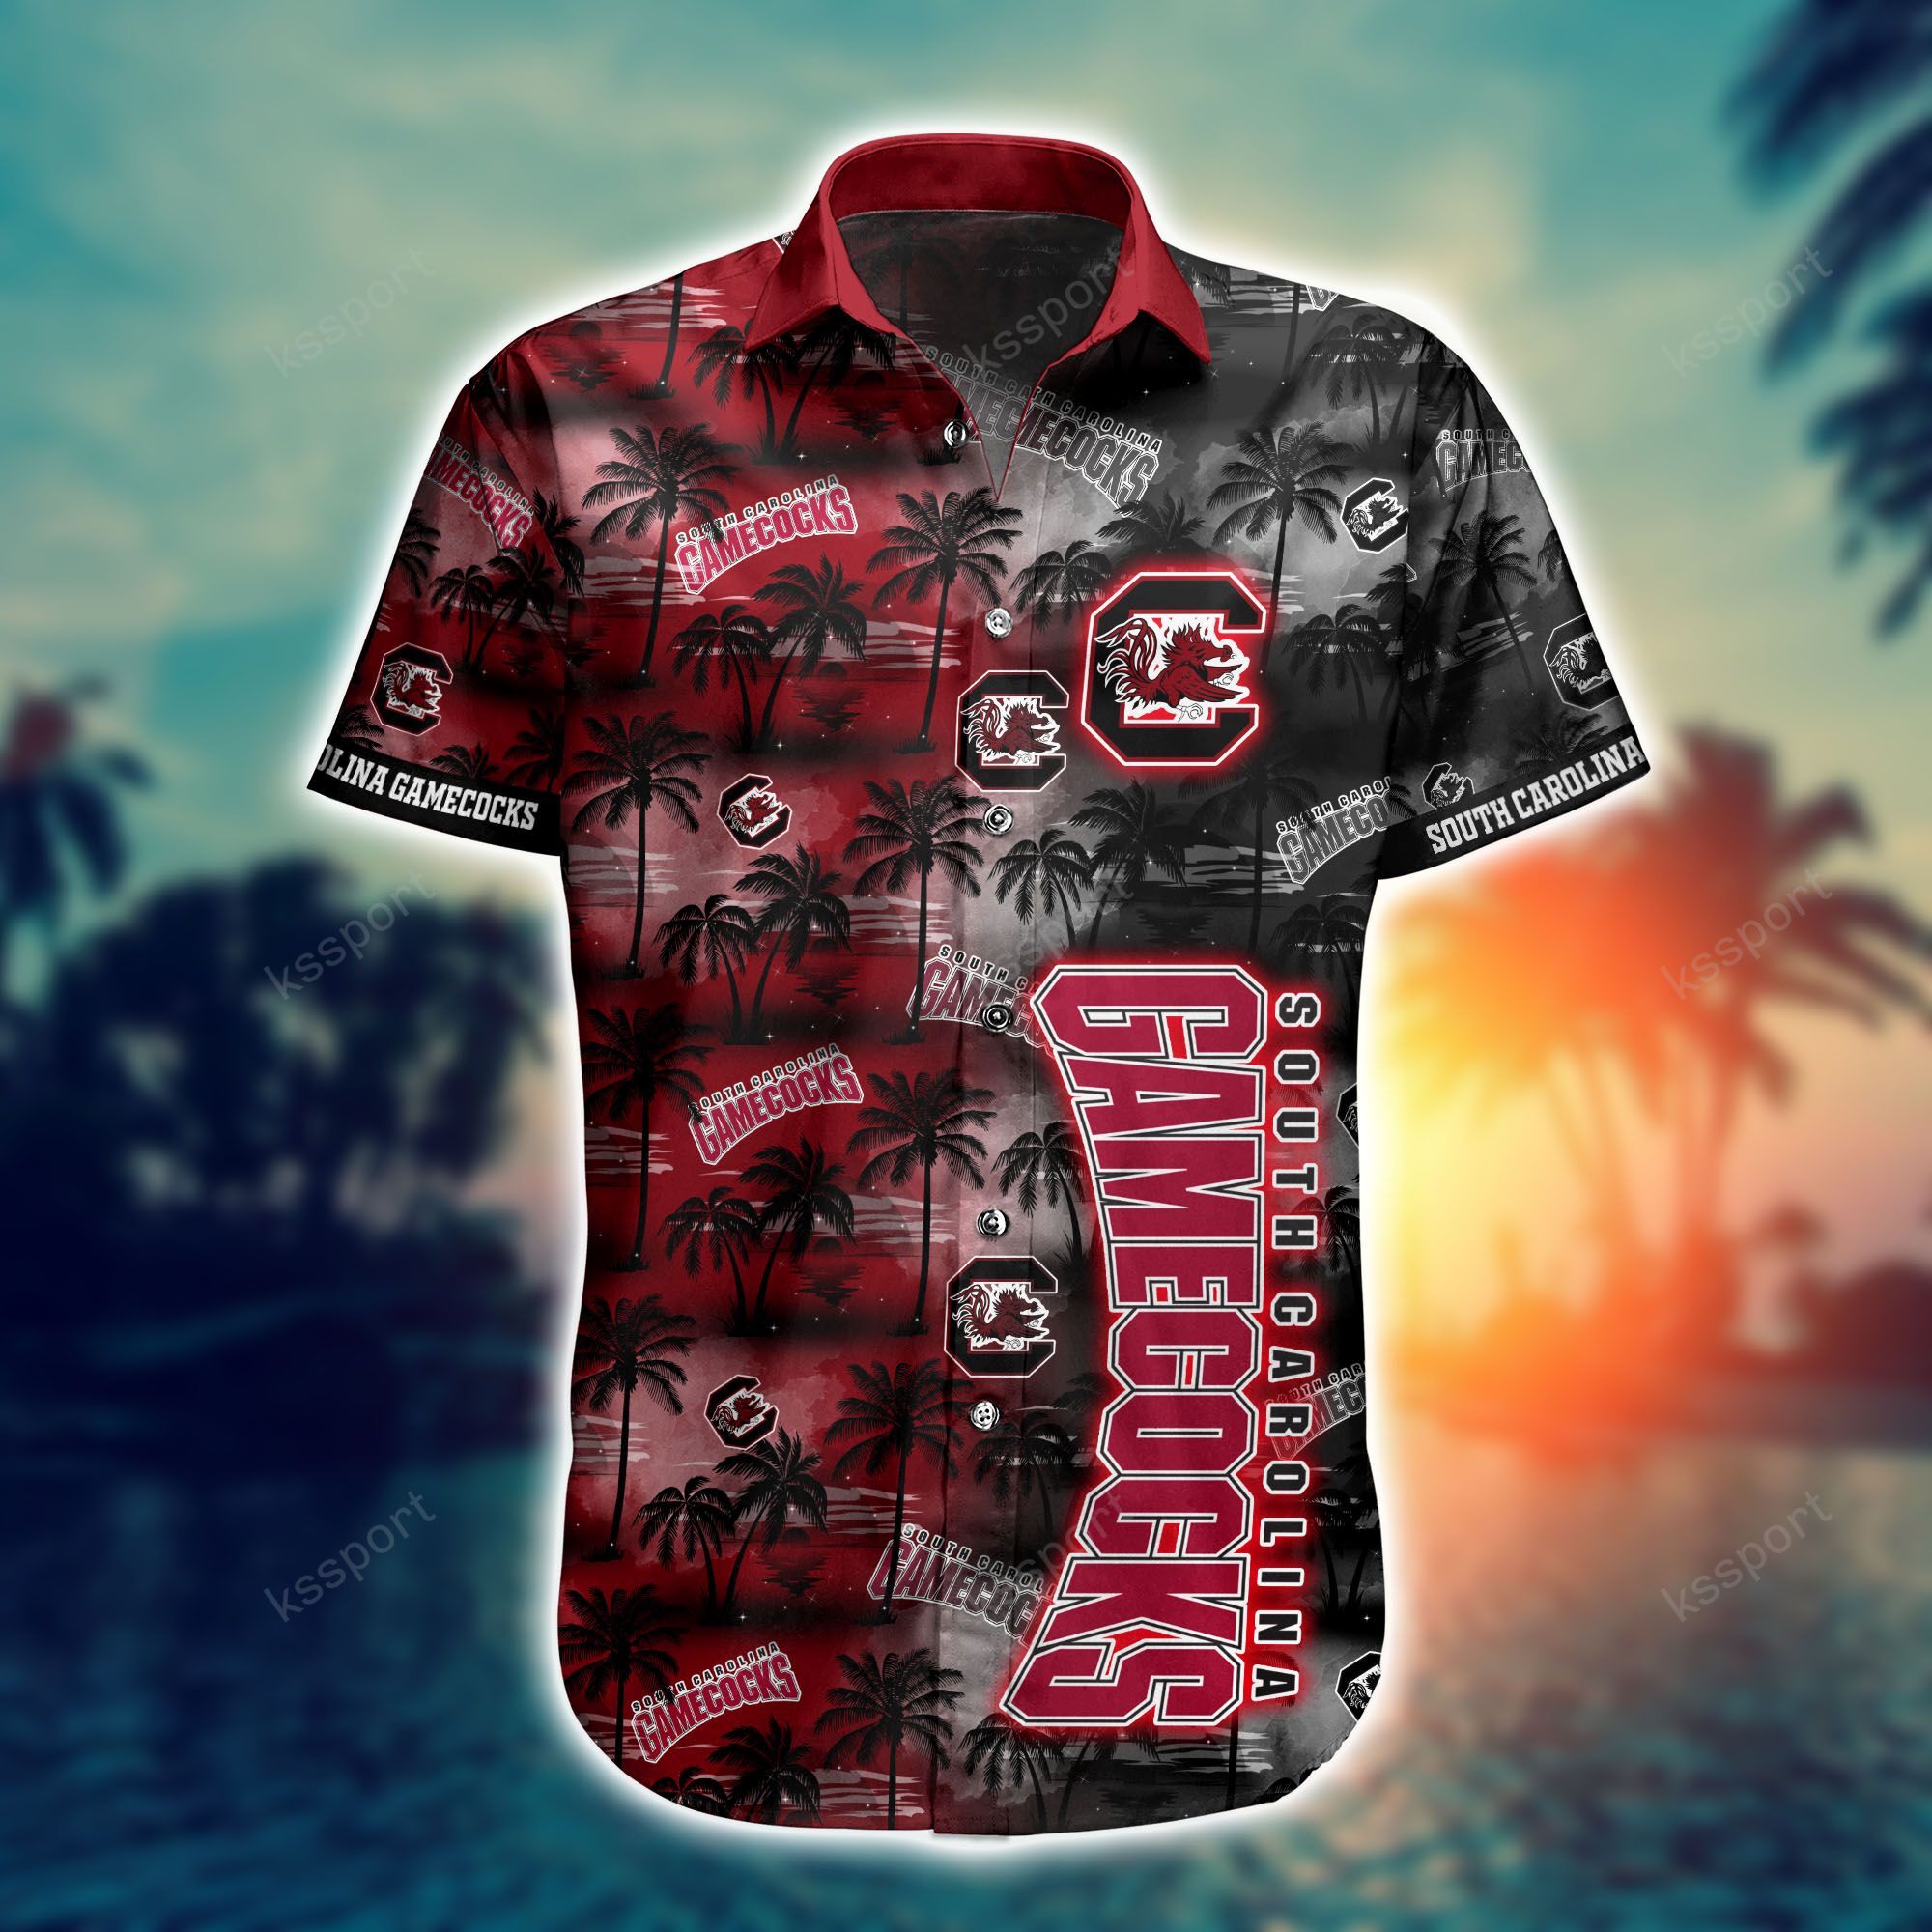 Top cool Hawaiian shirt 2022 - Make sure you get yours today before they run out! 171